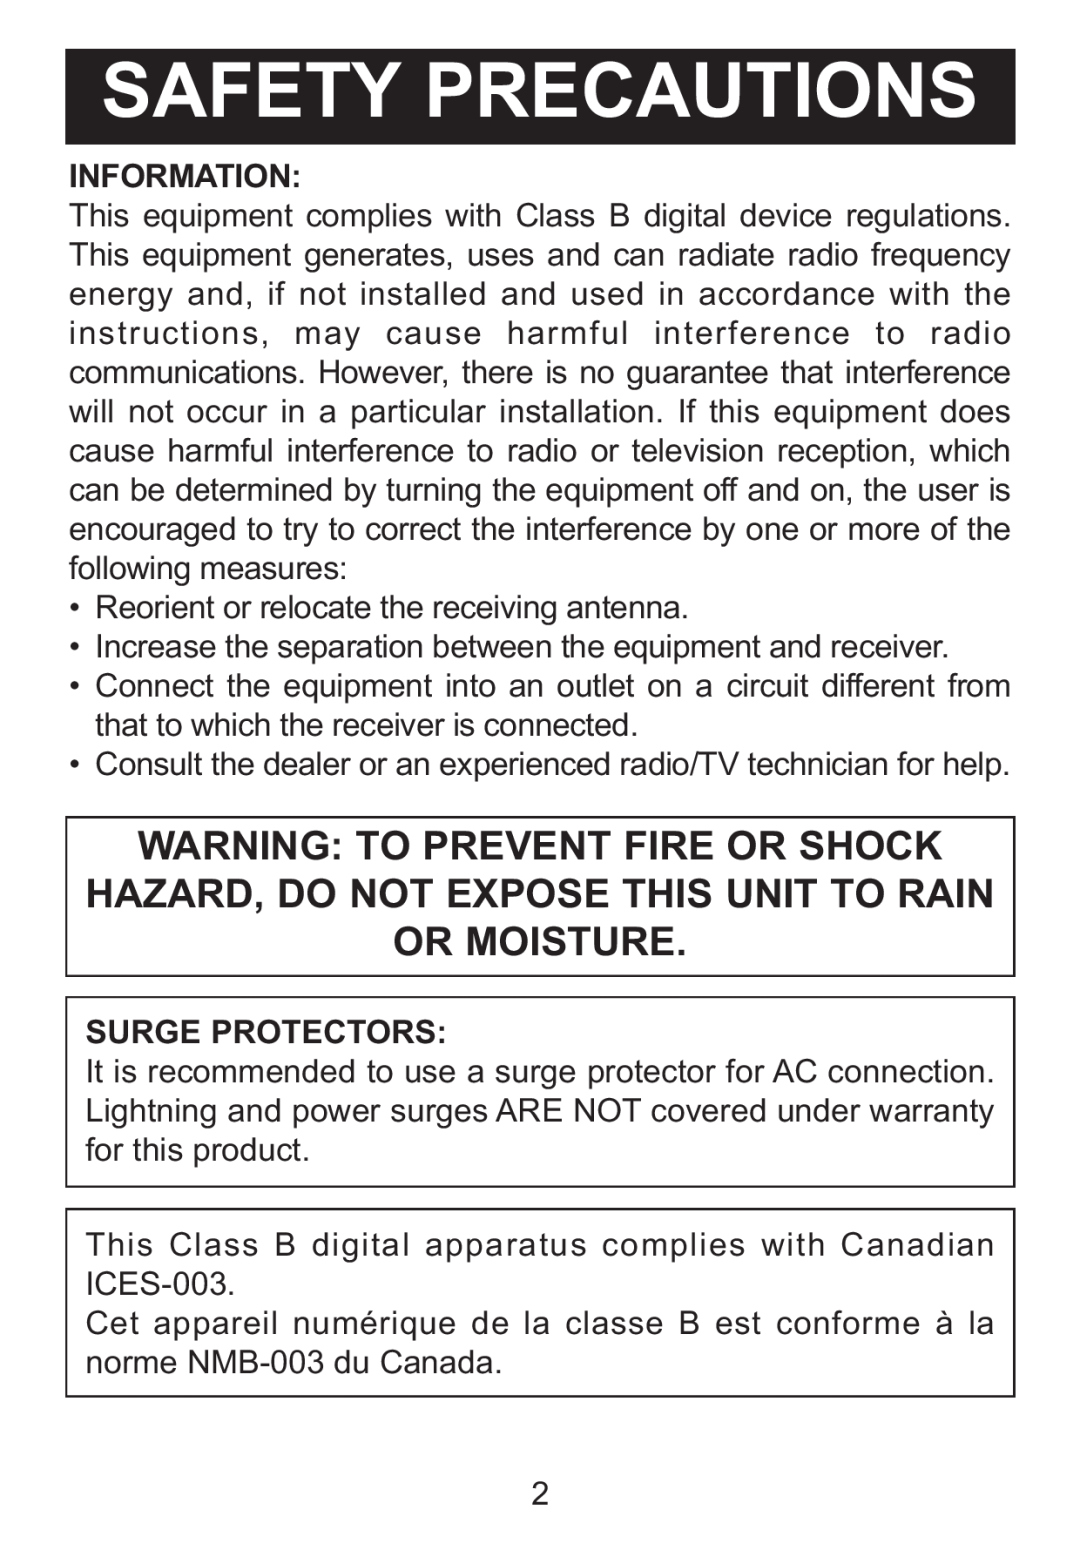 Memorex Mi4014 Safety Precautions, Warning To Prevent Fire Or Shock, Hazard, Do Not Expose This Unit To Rain Or Moisture 